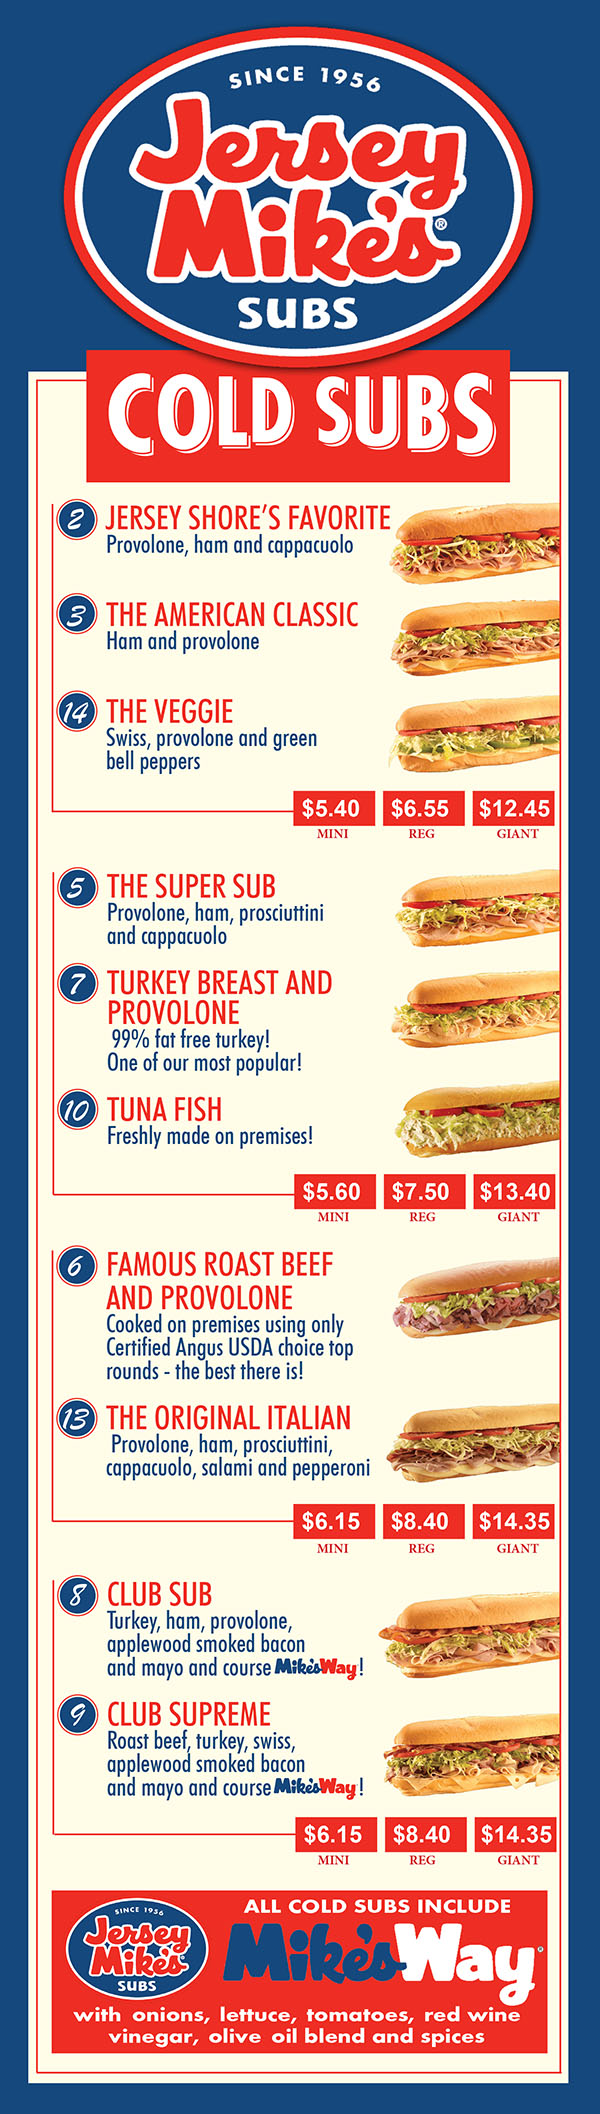 Jersey Mike's Subs Menu Lincoln Nebraska
    FRESH MADE
2 JERSEY SHORE’S FAVORITE
Provolone, ham and cappacuolo
3 THE AMERICAN CLASSIC
Ham and provolone
14 THE VEGGIE
Swiss, provolone and green
bell peppers
$5.25 $6.25 $11.50
MINI REG GIANT
5 THE SUPER SUB
Provolone, ham, prosciuttini
and cappacuolo
7 TURKEY BREAST AND
PROVOLONE
99% fat free turkey!
One of our most popular!
10 TUNA FISH
Freshly made on premises!
$5.50 $6.95 $12.25
MINI REG GIANT
6 FAMOUS ROAST BEEF
AND PROVOLONE
Cooked on premises using only
Certified Angus USDA choice top
rounds - the best there is!
13 THE ORIGINAL ITALIAN
Provolone, ham, prosciuttini,
cappacuolo, salami and pepperoni
$5.95 $7.75 $13.25
MINI REG GIANT
8 CLUB SUB
Turkey, ham, provolone,
applewood smoked bacon
and mayo and course !
9 CLUB SUPREME
Roast beef, turkey, swiss,
applewood smoked bacon
and mayo and course !
$5.95 $7.75 $13.25
MINI REG GIANT
ALL COLD SUBS INCLUDE
with onions, lettuce, tomatoes, red wine
vinegar, olive oil blend and spices
17 JERSEY MIKE’S
FAMOUS PHILLY
Grilled onions and peppers
43 CHIPOTLE
CHEESE STEAK
Grilled onions, peppers, and
chipotle mayo. Wow!
You gotta have one!
$7.25 $17.75
REG GIANT
CHEESE STEAKS
56 BIG KAHUNA
CHEESE STEAK
Grilled onions and peppers
plus mushrooms,
jalapeños and extra cheese!
$7.75 $13.25
REG GIANT
15 MEATBALL AND CHEESE
Melted provolone, tomato
sauce and parmesan cheese
18 CHICKEN PARM
Melted provolone, tomato sauce
and parmesan cheese
20 GRILLED PASTRAMI
REUBEN
Swiss cheese, sauerkraut
and Thousand Island dressing
$7.25 $12.75
REG GIANT
CHEESE STEAKS
CHICKEN CHEESE STEAKS
16 CHICKEN PHILLY
CHEESE STEAK
Grilled onions and peppers
4 2 CHIPOTLE CHICKEN
CHEESE STEAK
Grilled onions, peppers,
and chipotle mayo
31 CALIFORNIA CHICKEN
CHEESE STEAK
Lettuce, tomato, mayo
$6.95 $12.45
REG GIANT
55 BIG KAHUNA CHICKEN
CHEESE STEAK
Grilled onions and peppers plus
mushrooms, jalapeños
and extra cheese!
44 BUFFALO CHICKEN
CHEESE STEAK
Frank’s Red Hot Sauce, lettuce,
tomato with blue cheese dressing
26 BACON RANCH CHICKEN
CHEESE STEAK
Applewood smoked bacon, lettuce,
tomato with ranch dressing
$7.75 $13.75
REG GIANT
CHICKEN CAESAR WRAP
Grilled sliced chicken breast with
lettuce, parmesan cheese and
creamy caesar dressing
BUFFALO CHICKEN WRAP
Grilled sliced chicken breast smothered
in Frank’s Red Hot Sauce with melted
white American cheese, lettuce, tomato
and blue cheese dressing
BAJA CHICKEN WRAP
Grilled sliced chicken breast, American
cheese, salsa, lettuce and jalapeños
GRILLED VEGGIE WRAP
Grilled green bell peppers and onions,
melted swiss and provolone, lettuce,
tomato and homestyle ranch dressing
TURKEY WRAP
Highest quality, 99% fat free turkey,
lettuce, tomato and honey mustard
$7.75
MAKE ANY SUB A WRAP OR A SALAD TUB
Priced the same as a Regular
Kids size sub, drink
and a cookie
• Turkey & Cheese
• Ham & Cheese
• Salami & Cheese
Recommended for children 8 and under
MAKE ANY SUB
A COMBO
Add small chips
& a drink to any sub
FOUNTAIN DRINKS
BOTTLED DRINKS
CHIPS
COOKIES
$1.99 $2.09
22 oz 32 oz
$1.99
$1.19
$ .50 $1.35
EACH FOR 3
$3.95
22 oz 32 oz
COLD SUBS
CHICKEN
WRAPS
KIDS MEAL
CHIPS & DRINKS
$2.79 $2.99
HOT SUBS FRESH GRILLED 
    